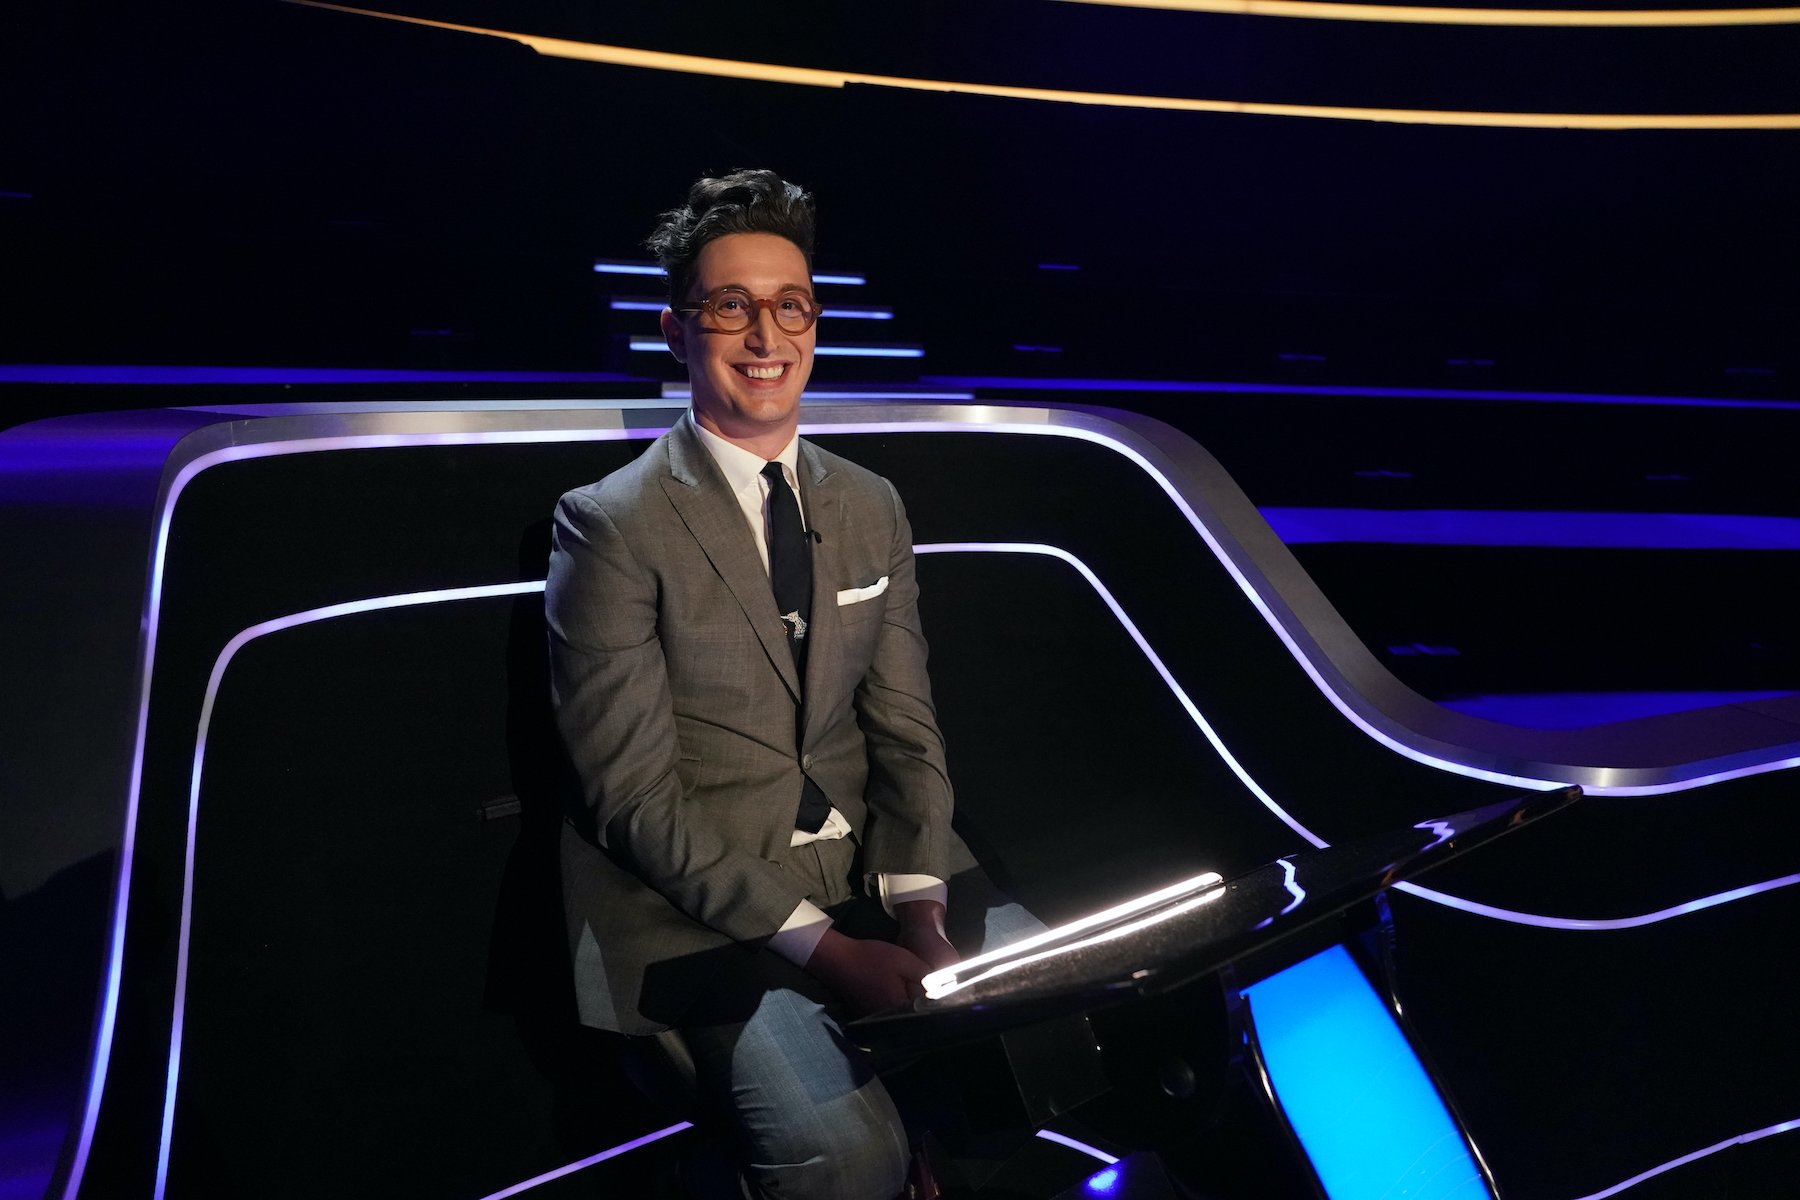 Buzzy Cohen smiles as he sits on the set of 'Who Wants to Be a Millionaire?'